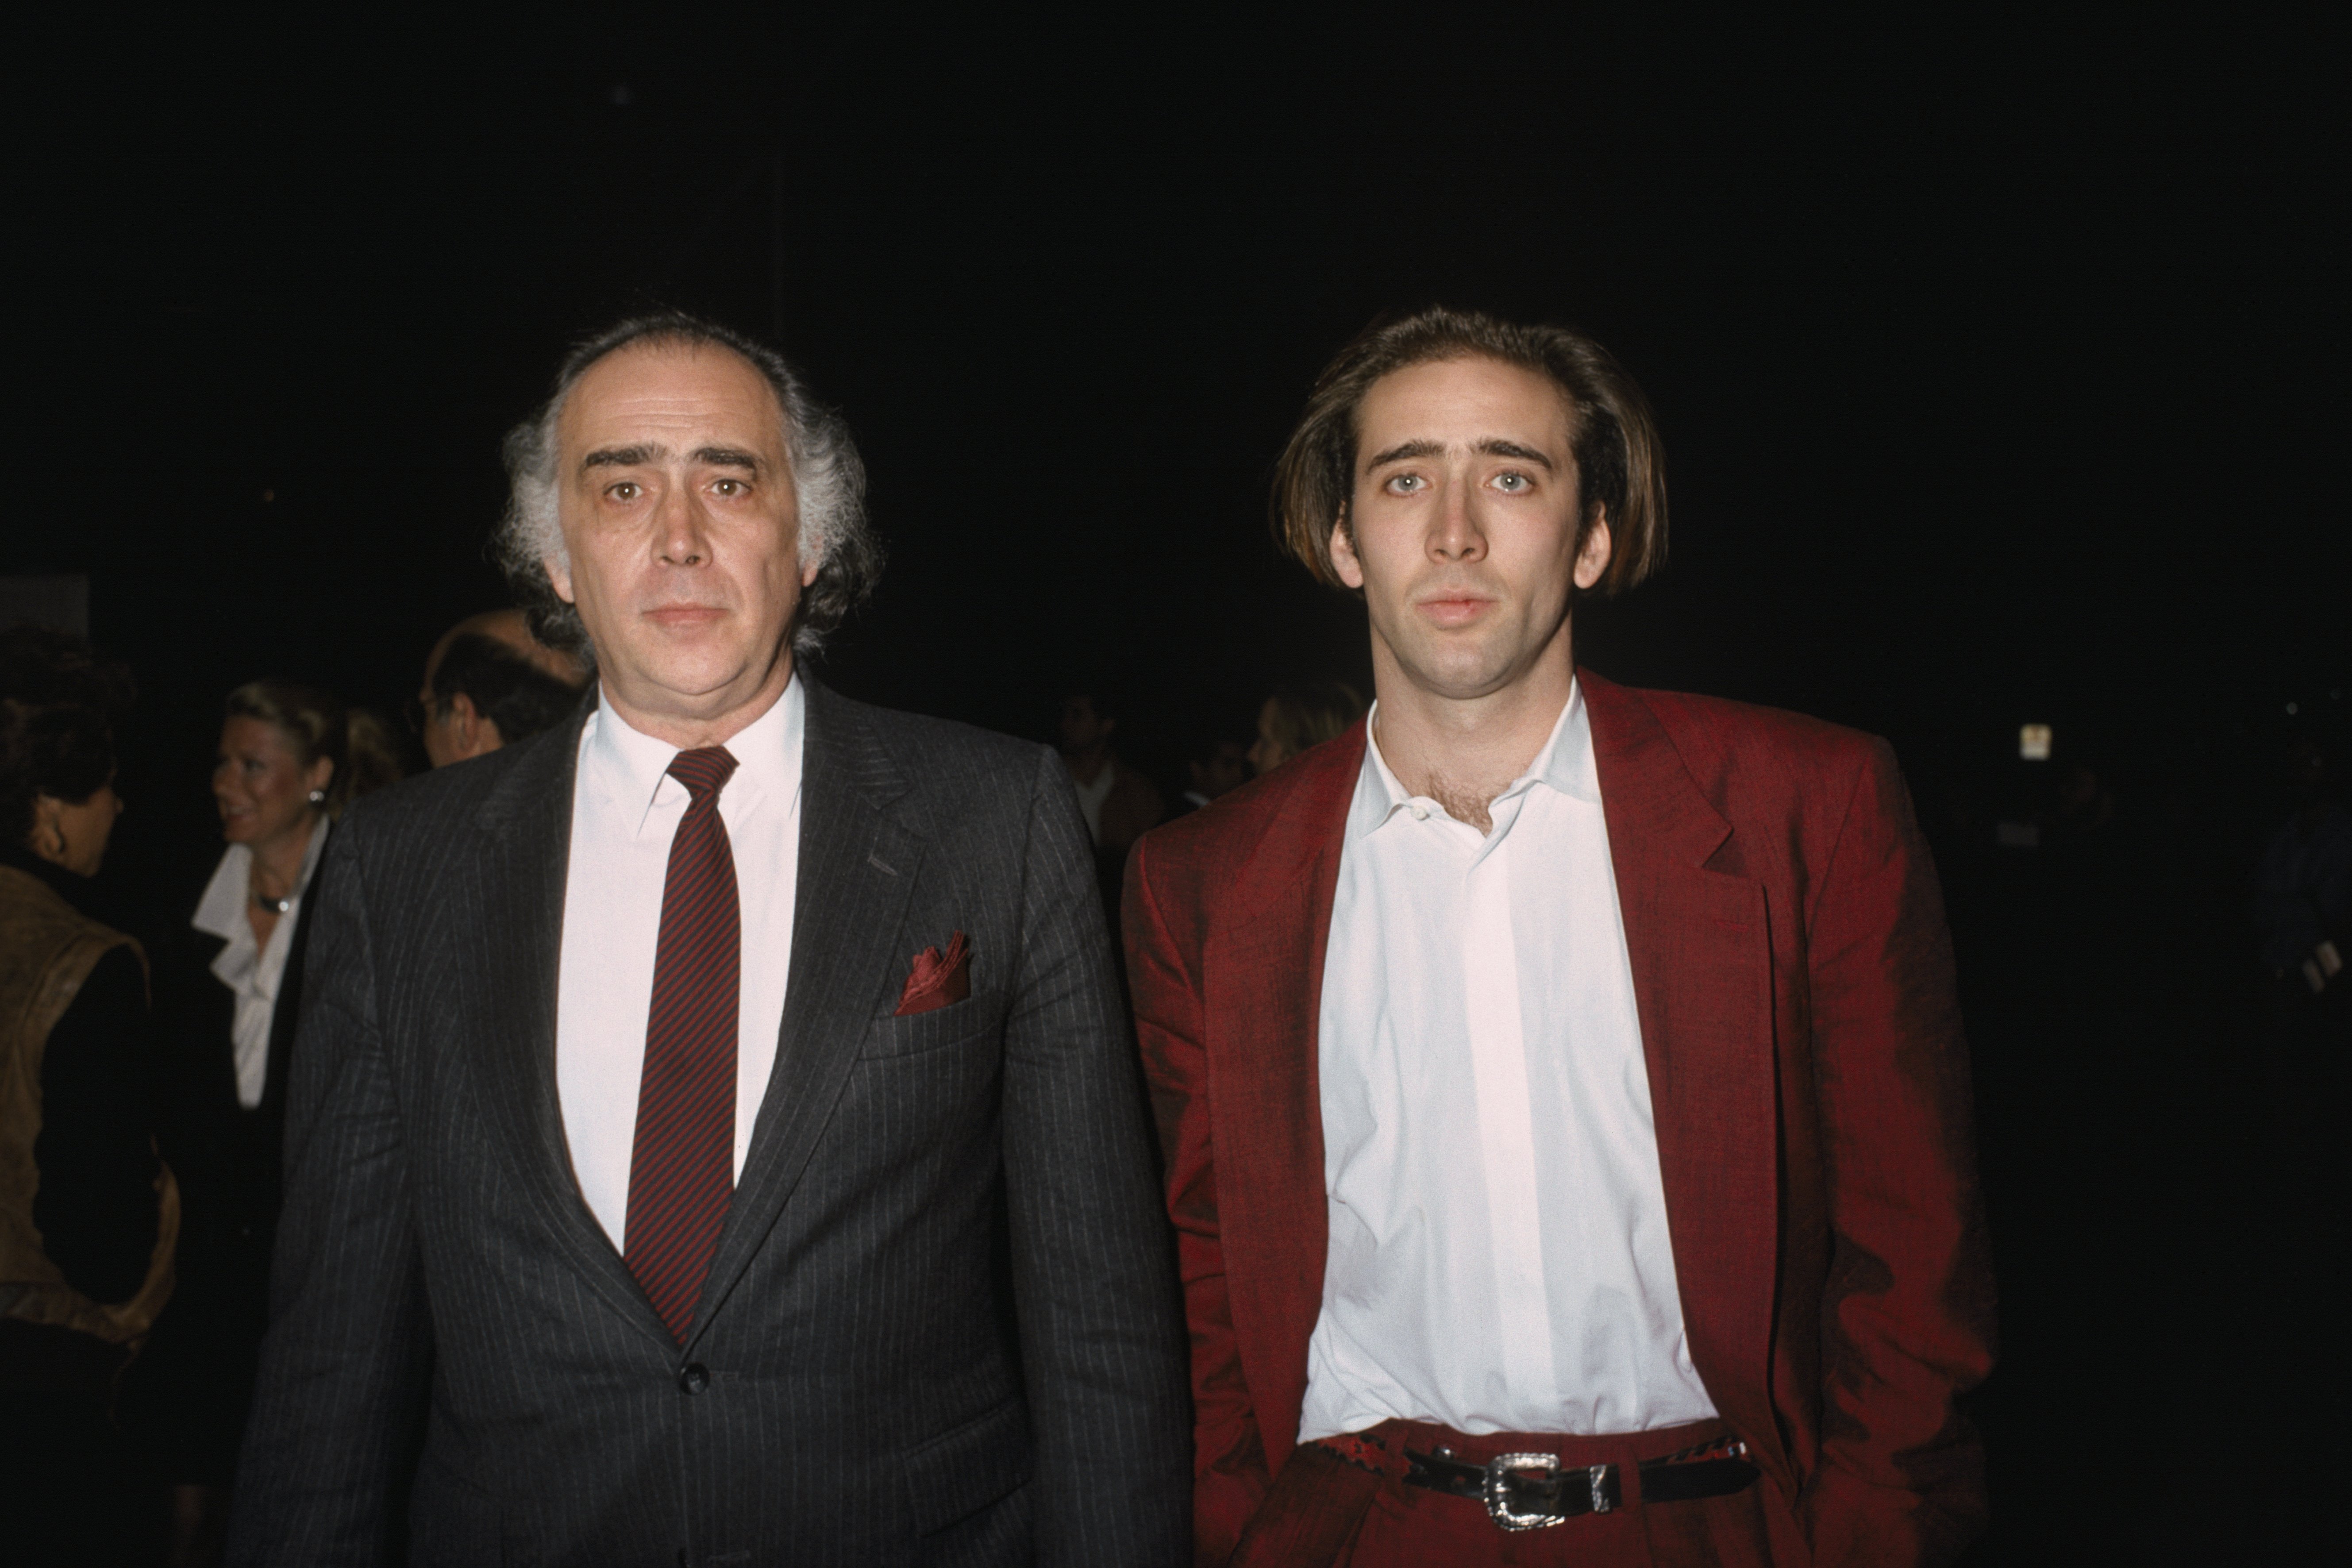 American actor Nicolas Cage and his father August Coppola attend the premiere of Moonstruck in 1988 | Source: Getty Images